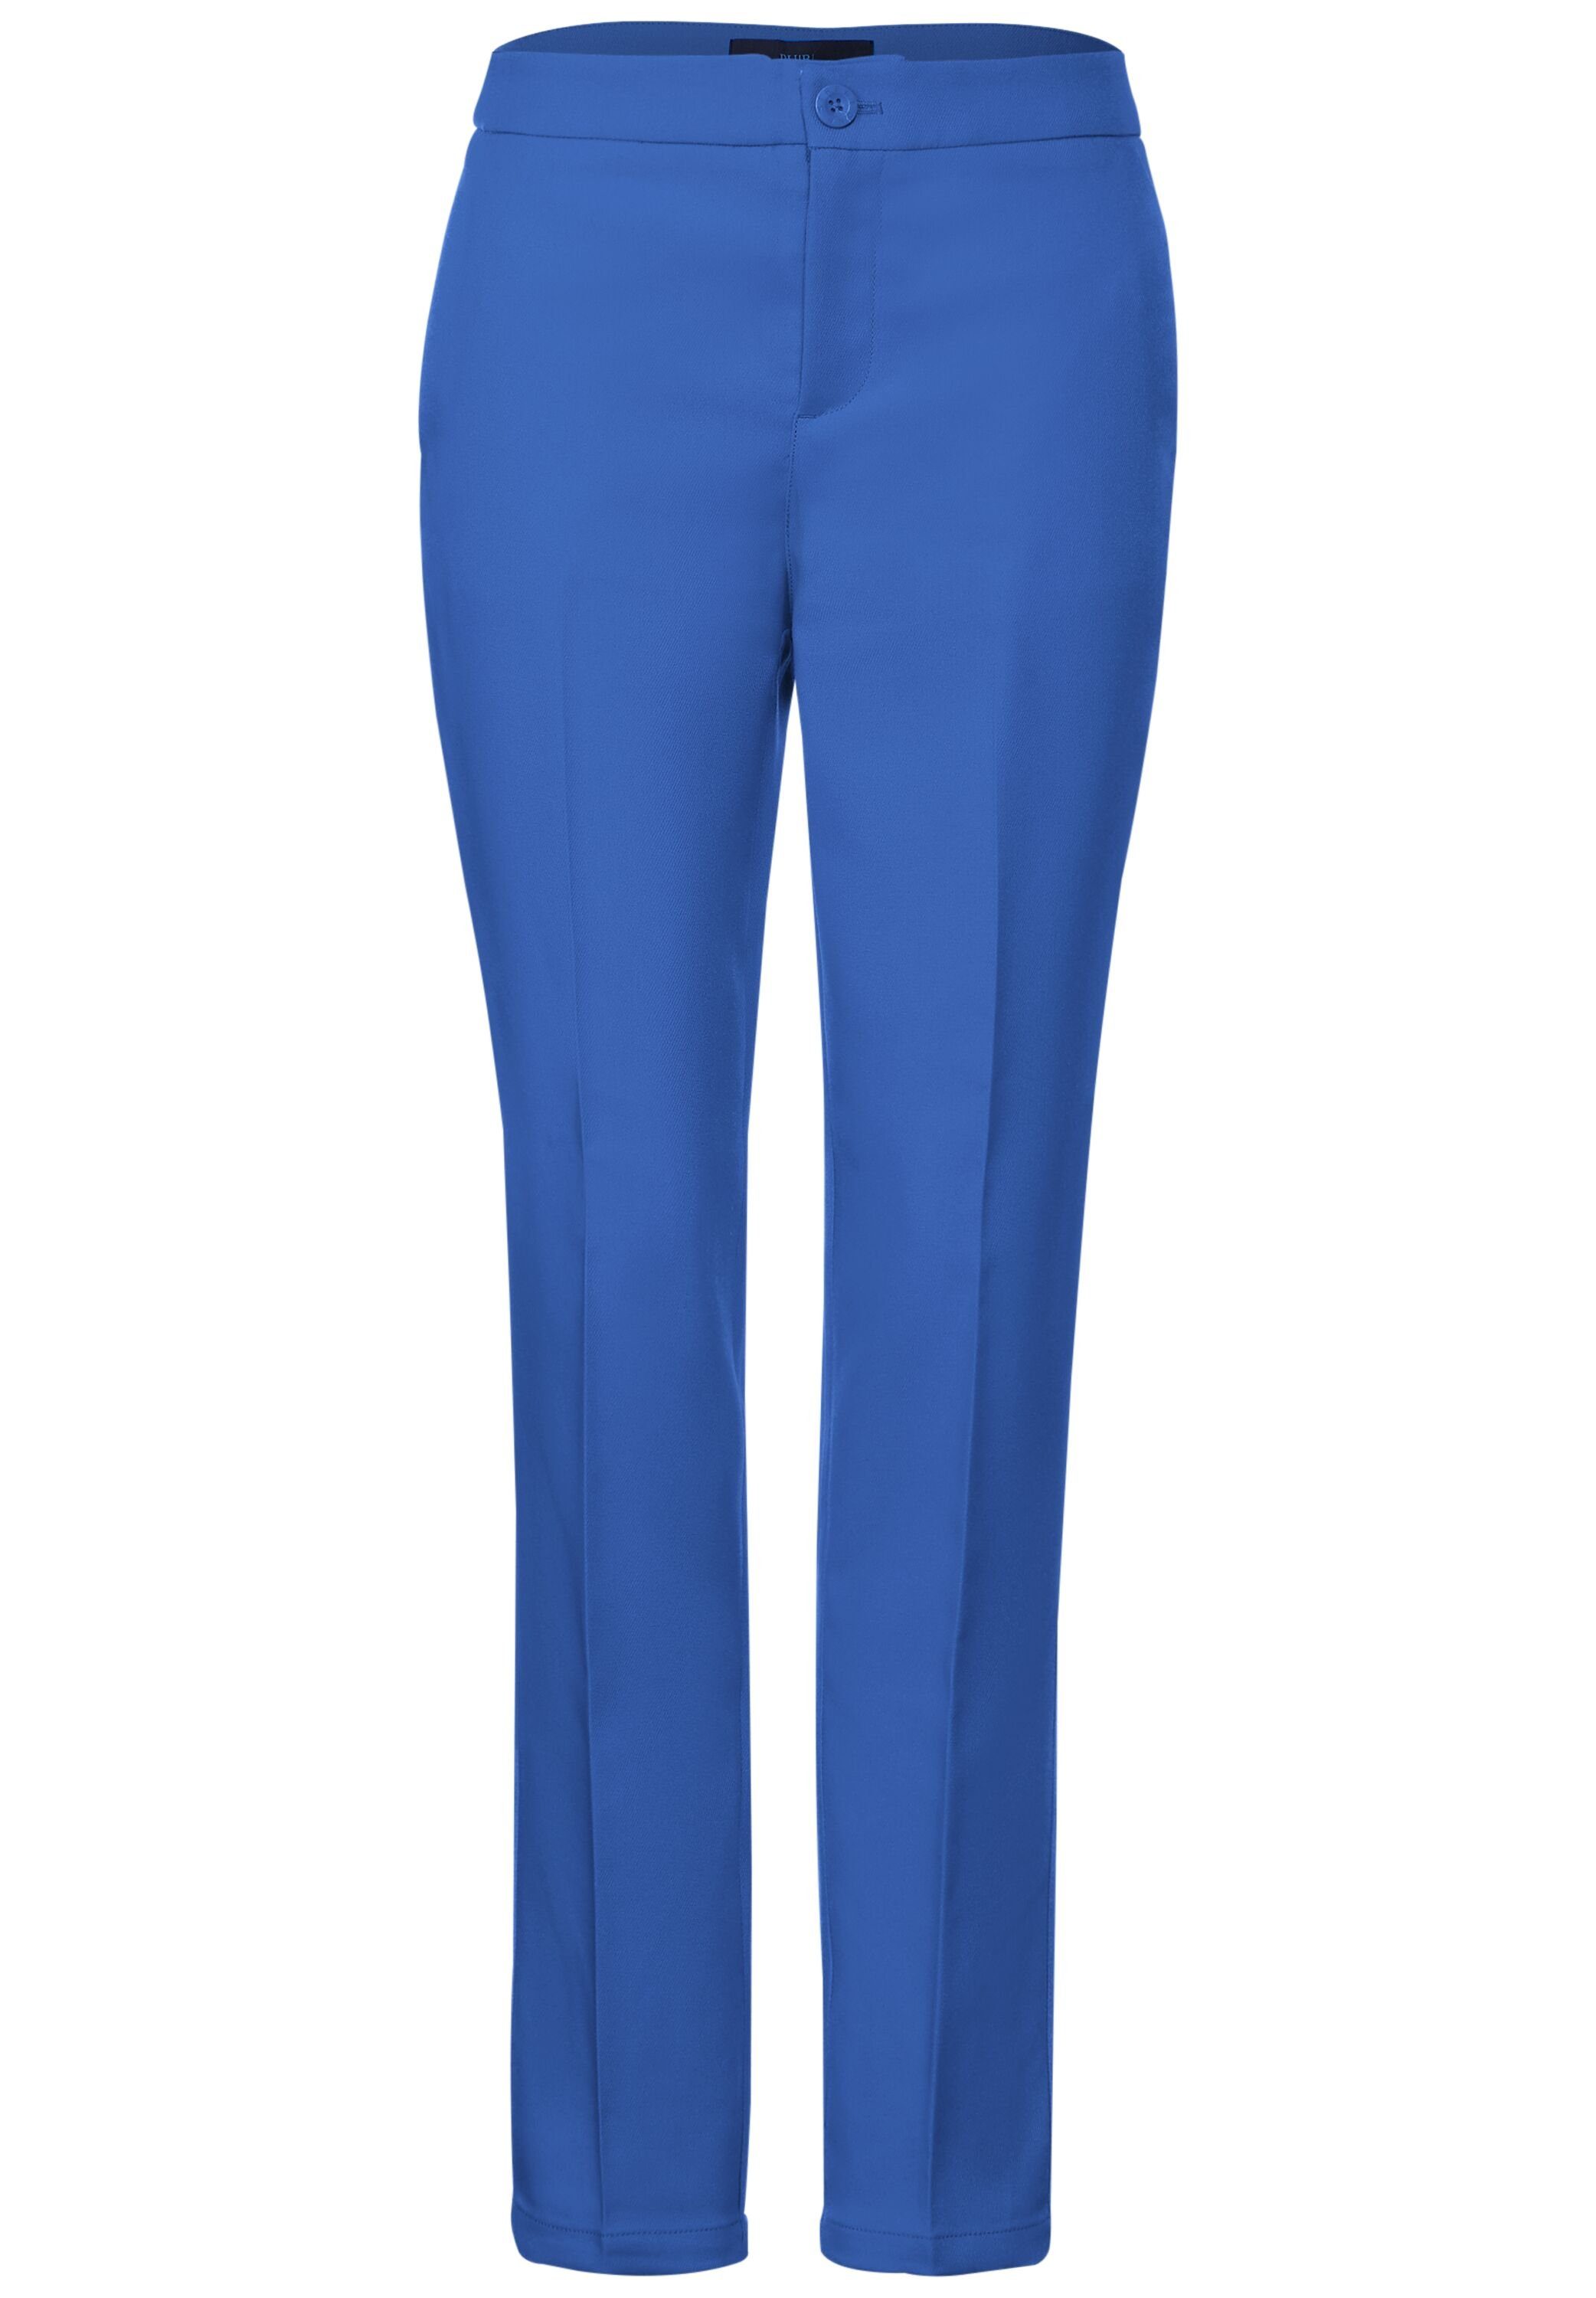 Loose blue Stoffhose Twill Pants fresh STREET im gentle intense Solid ONE Fit